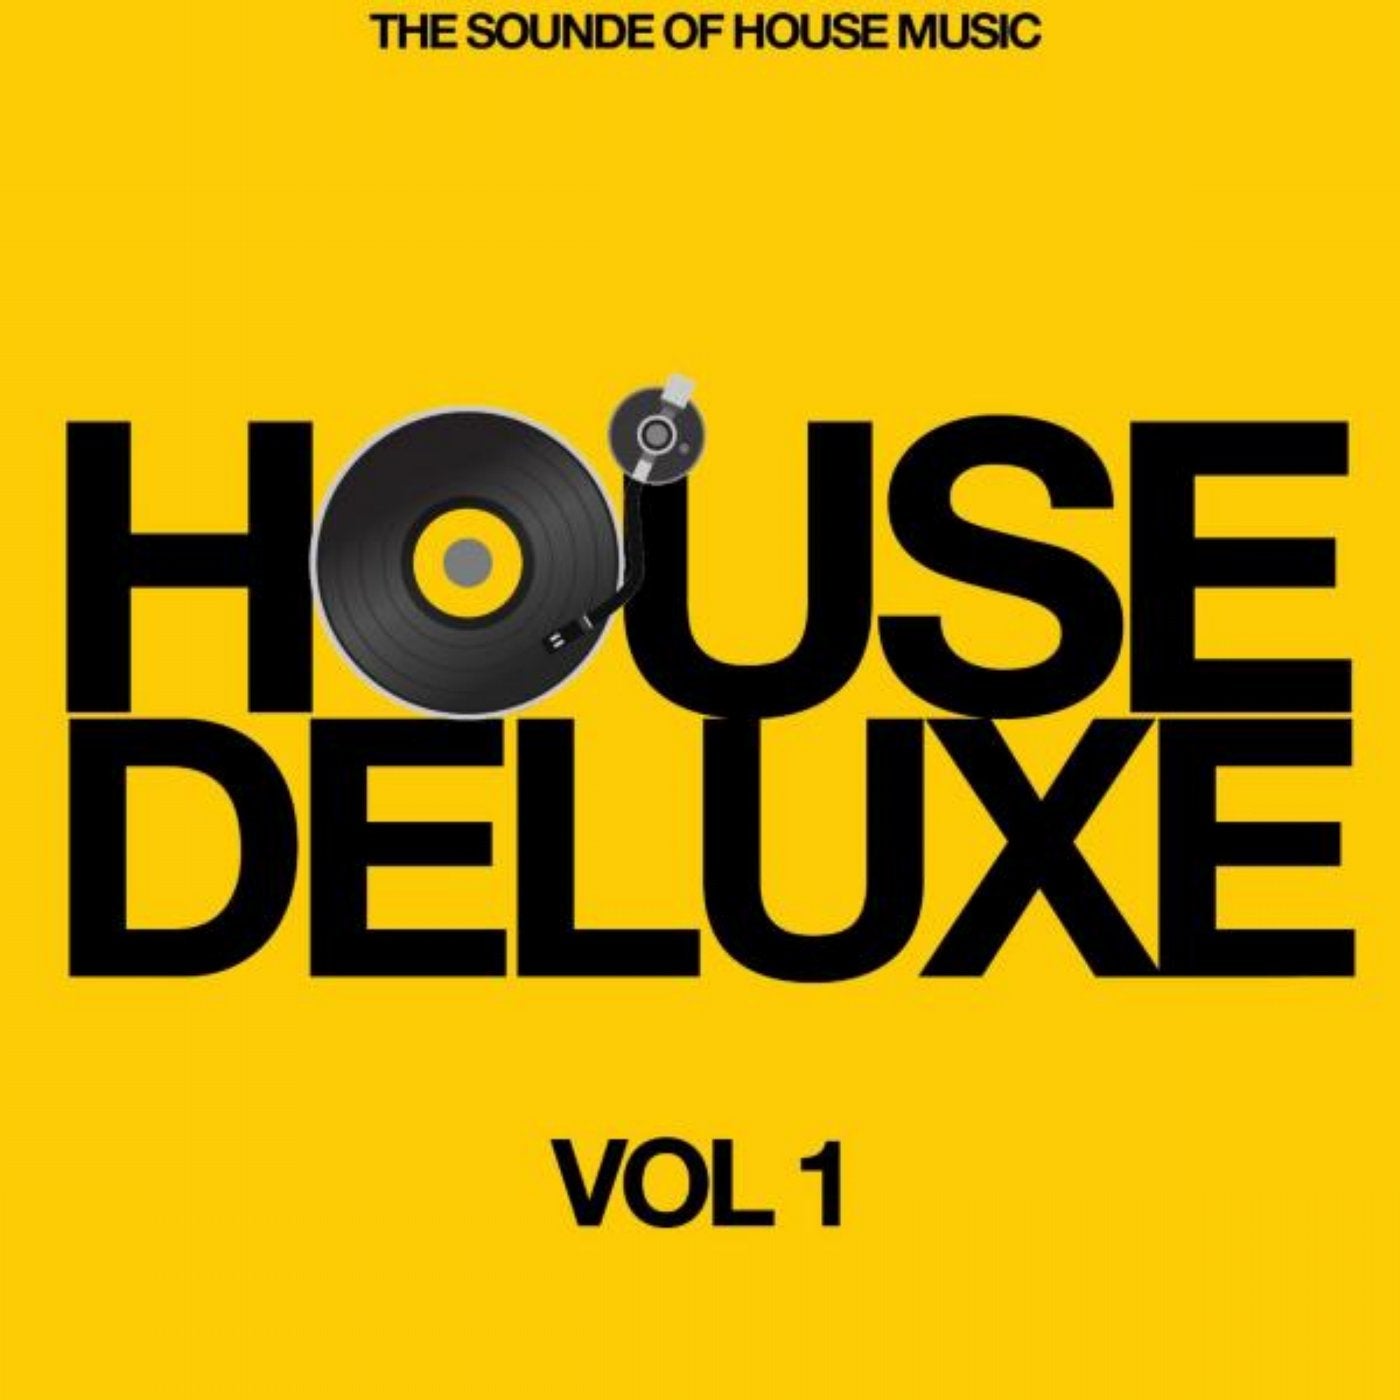 House Deluxe, Vol. 1 (The Sound of House Music)